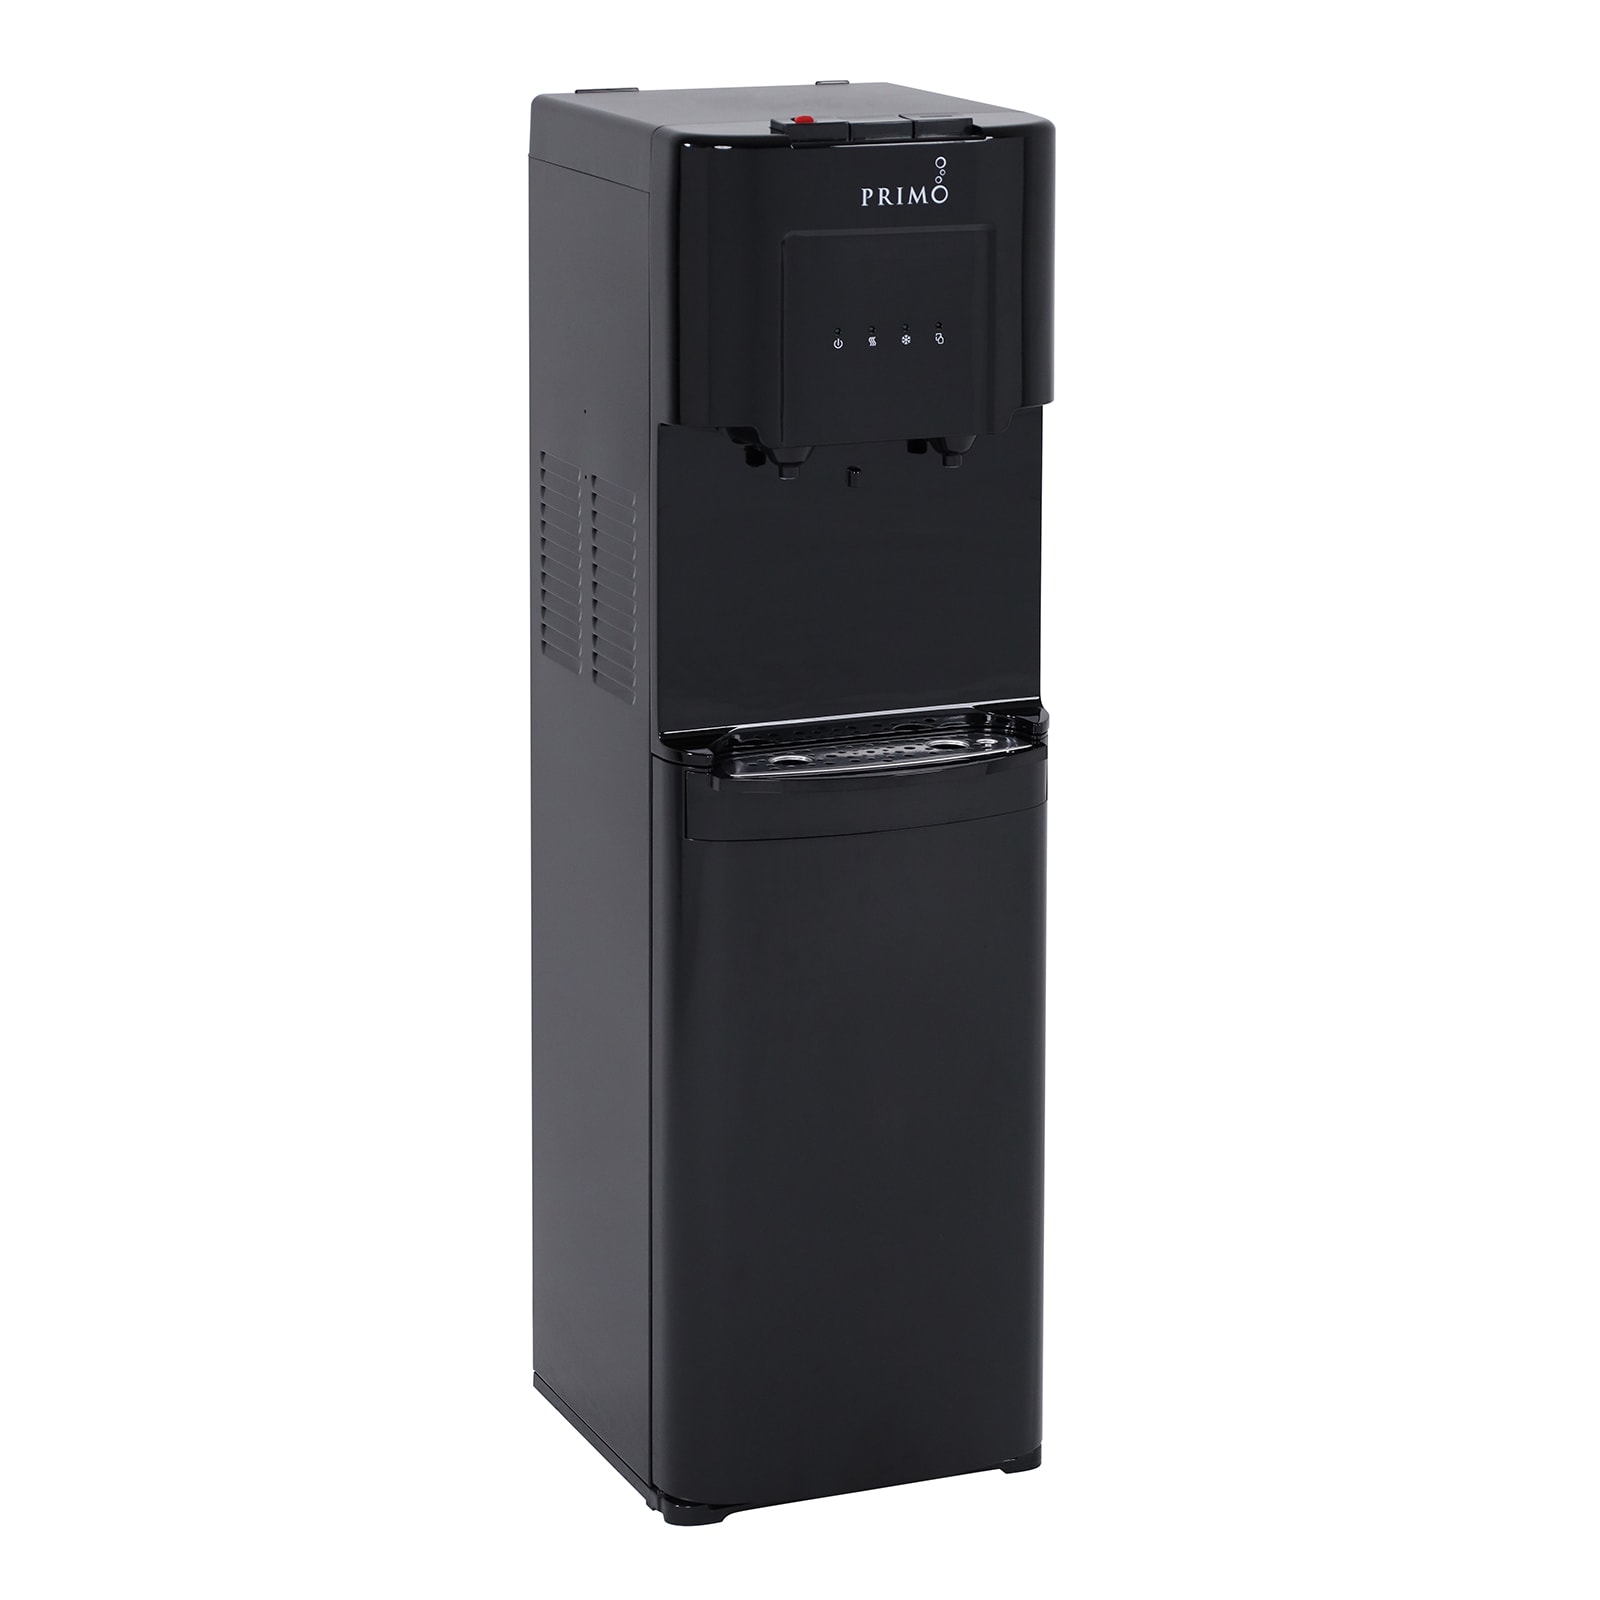 Primo Hot & Cold Water Dispenser - Each